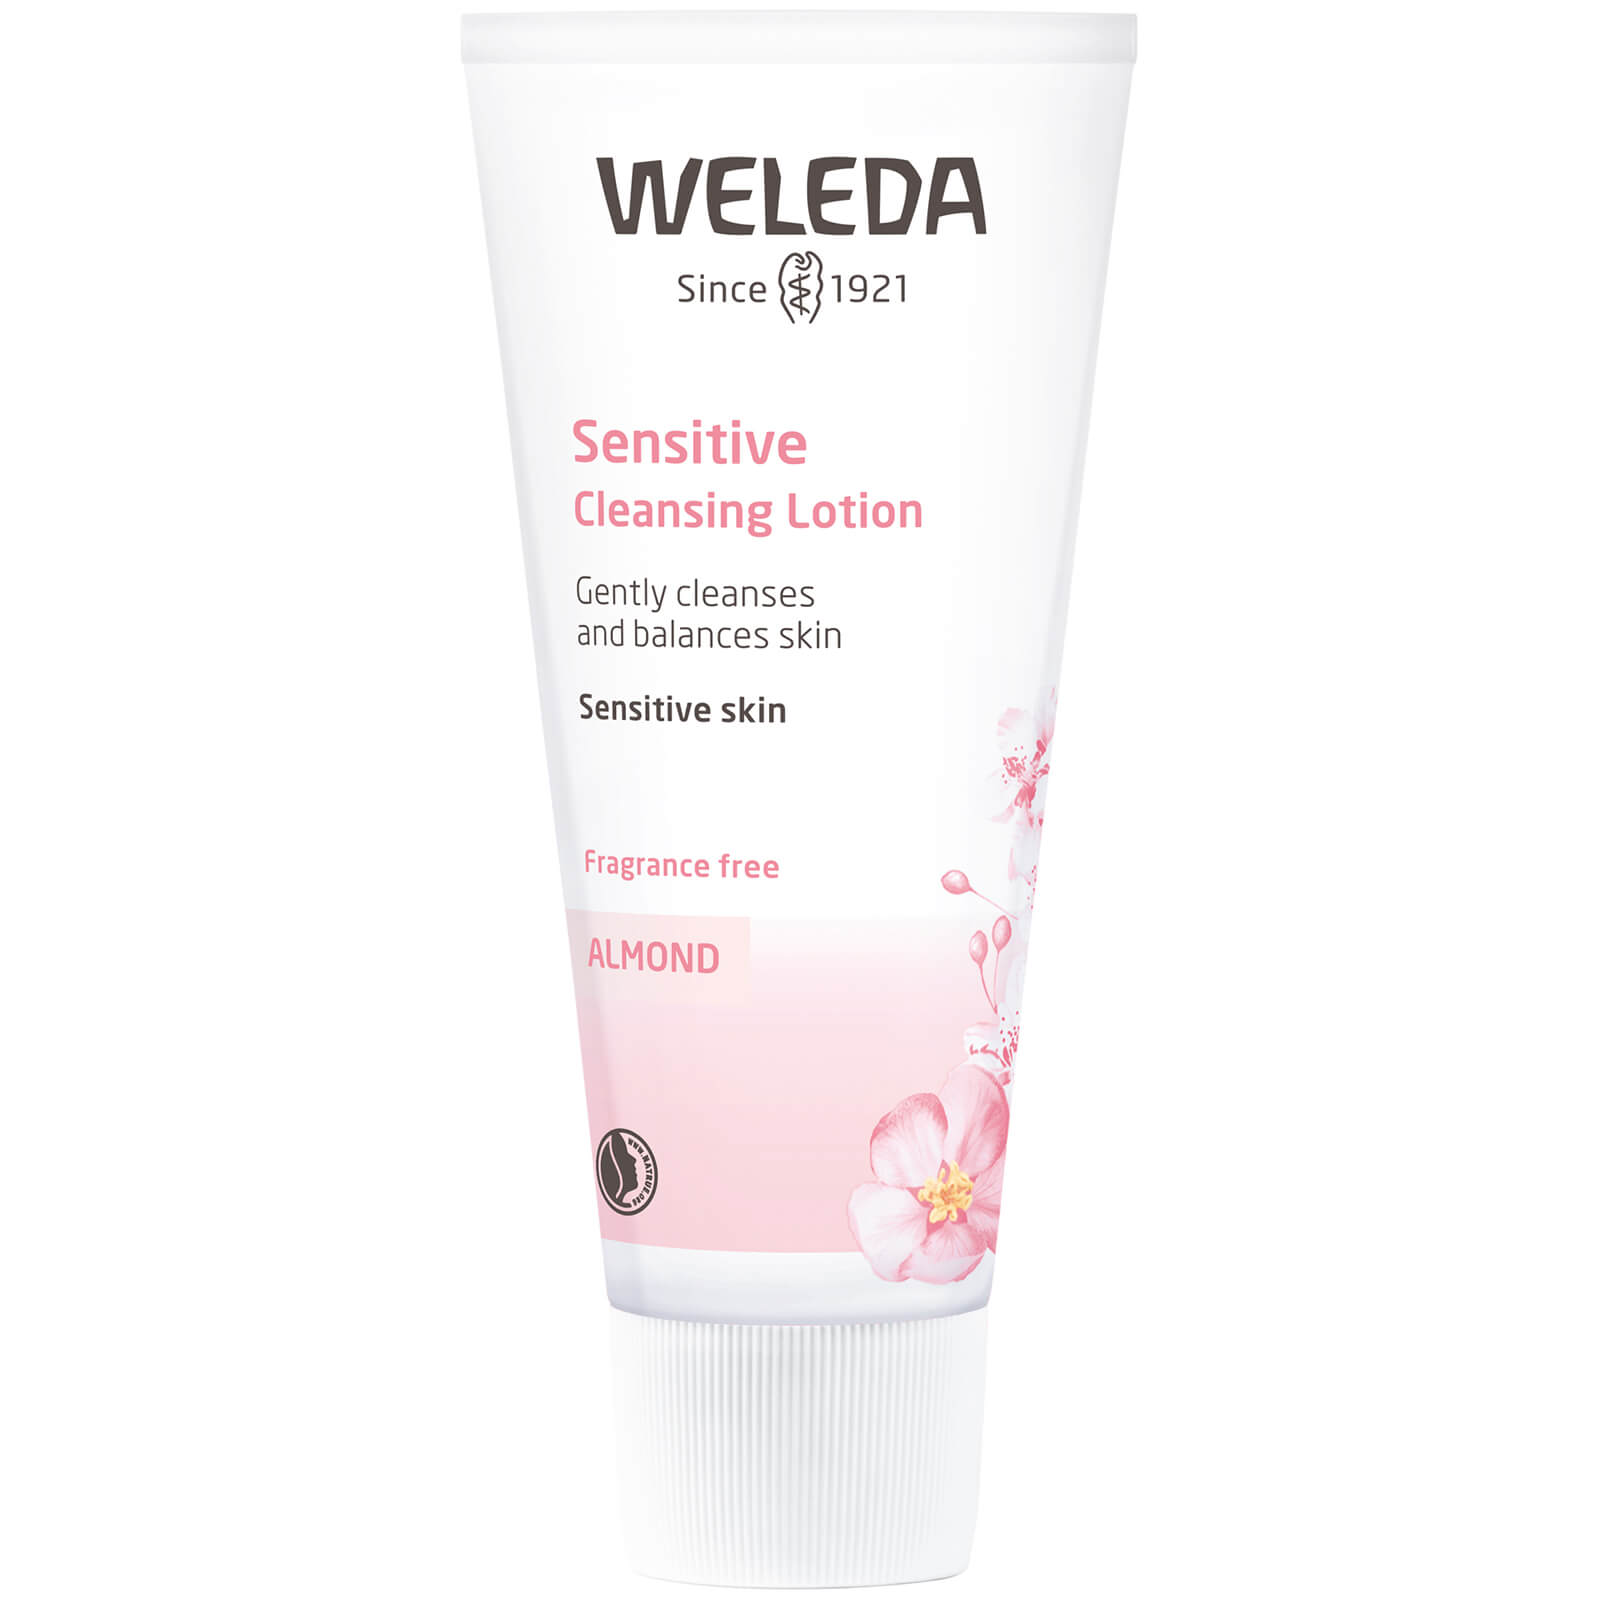 Image of Weleda Sensitive Cleansing Lotion - Almond 75ml